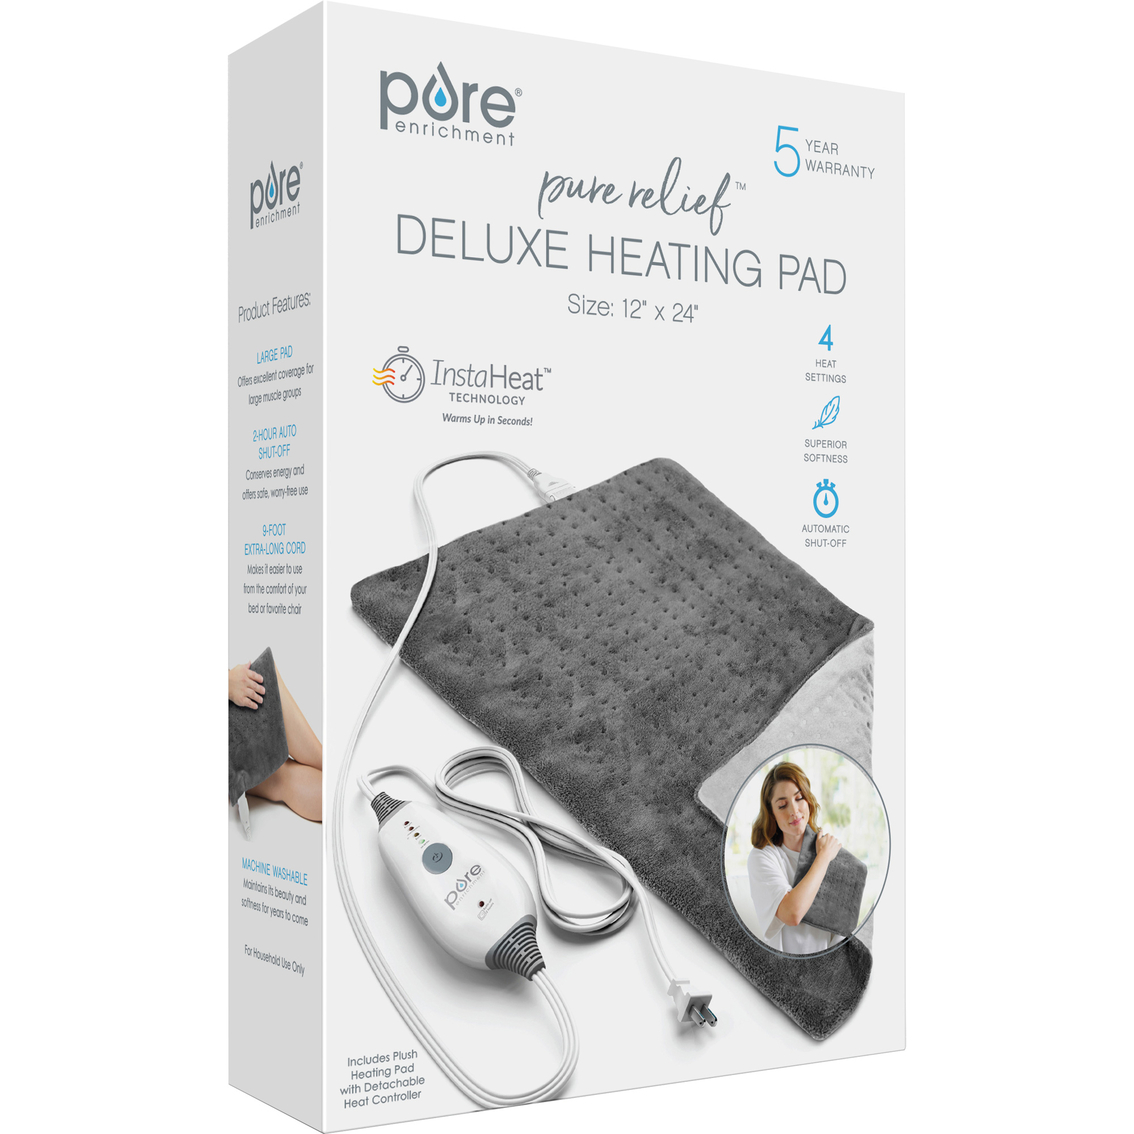 Pure Enrichment PureRelief Deluxe Heating Pad 12 x 24 in. - Image 5 of 5